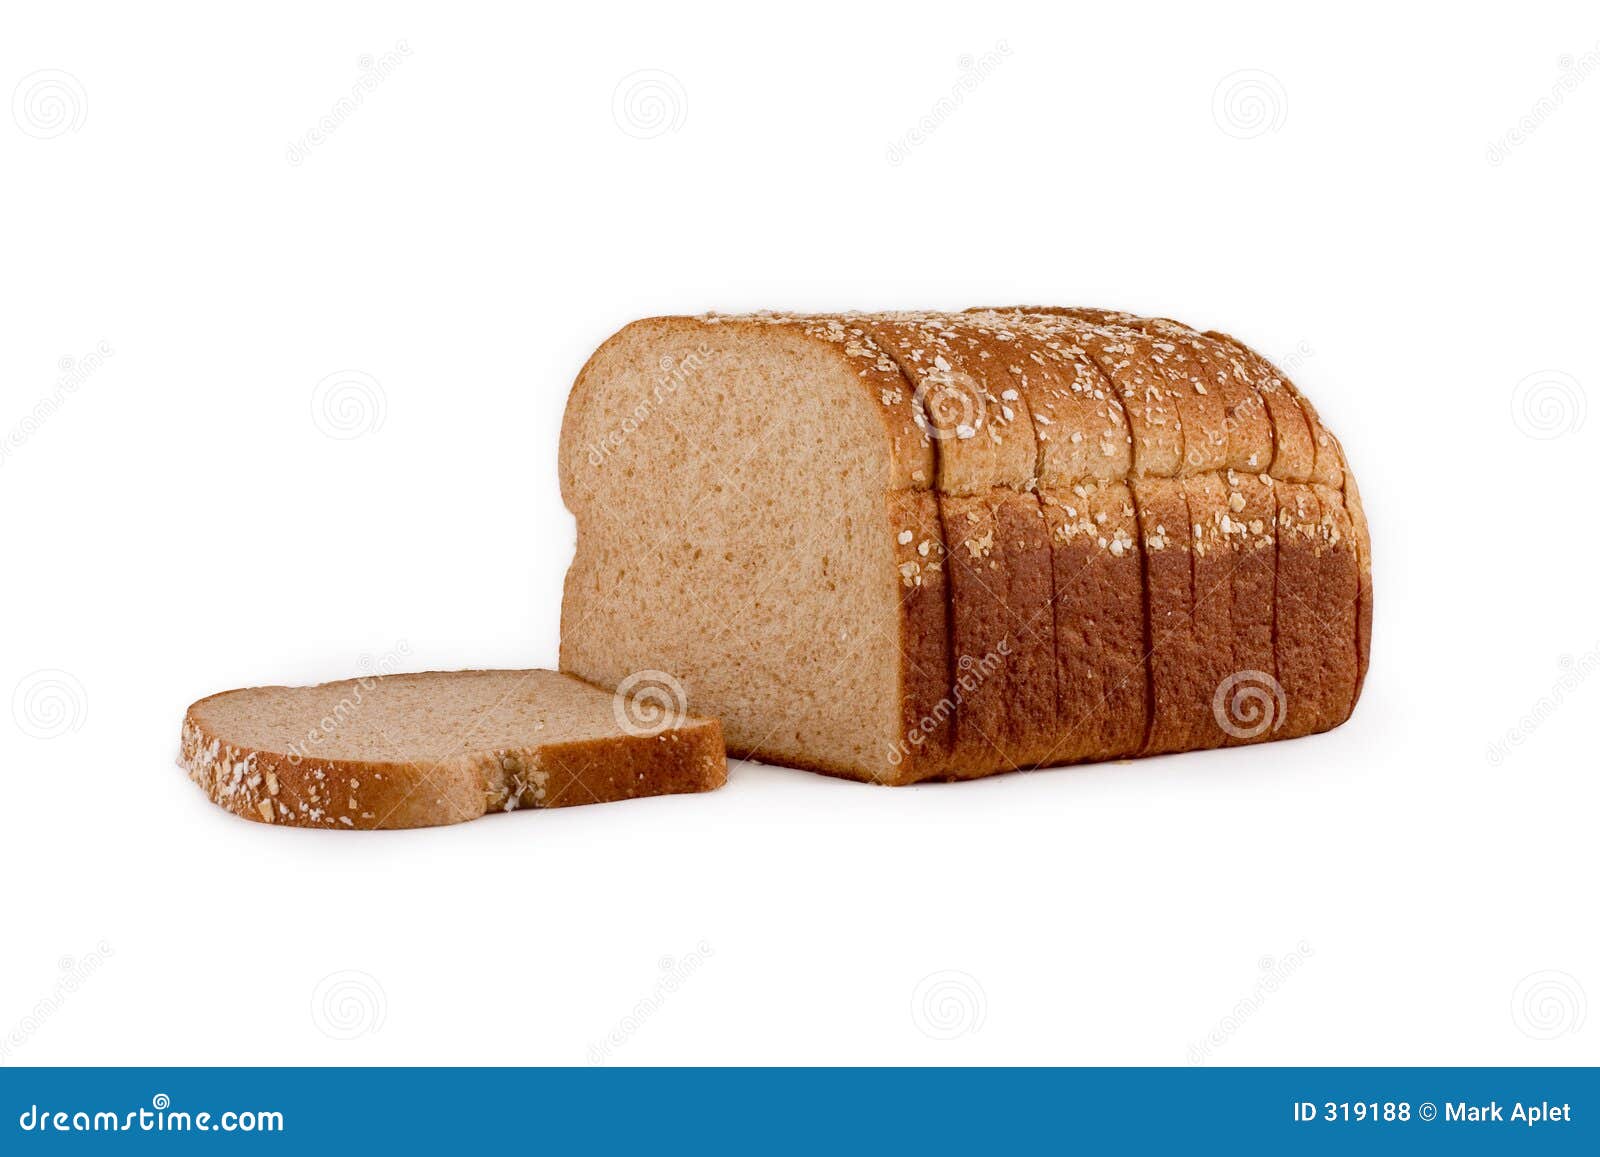  loaf of bread